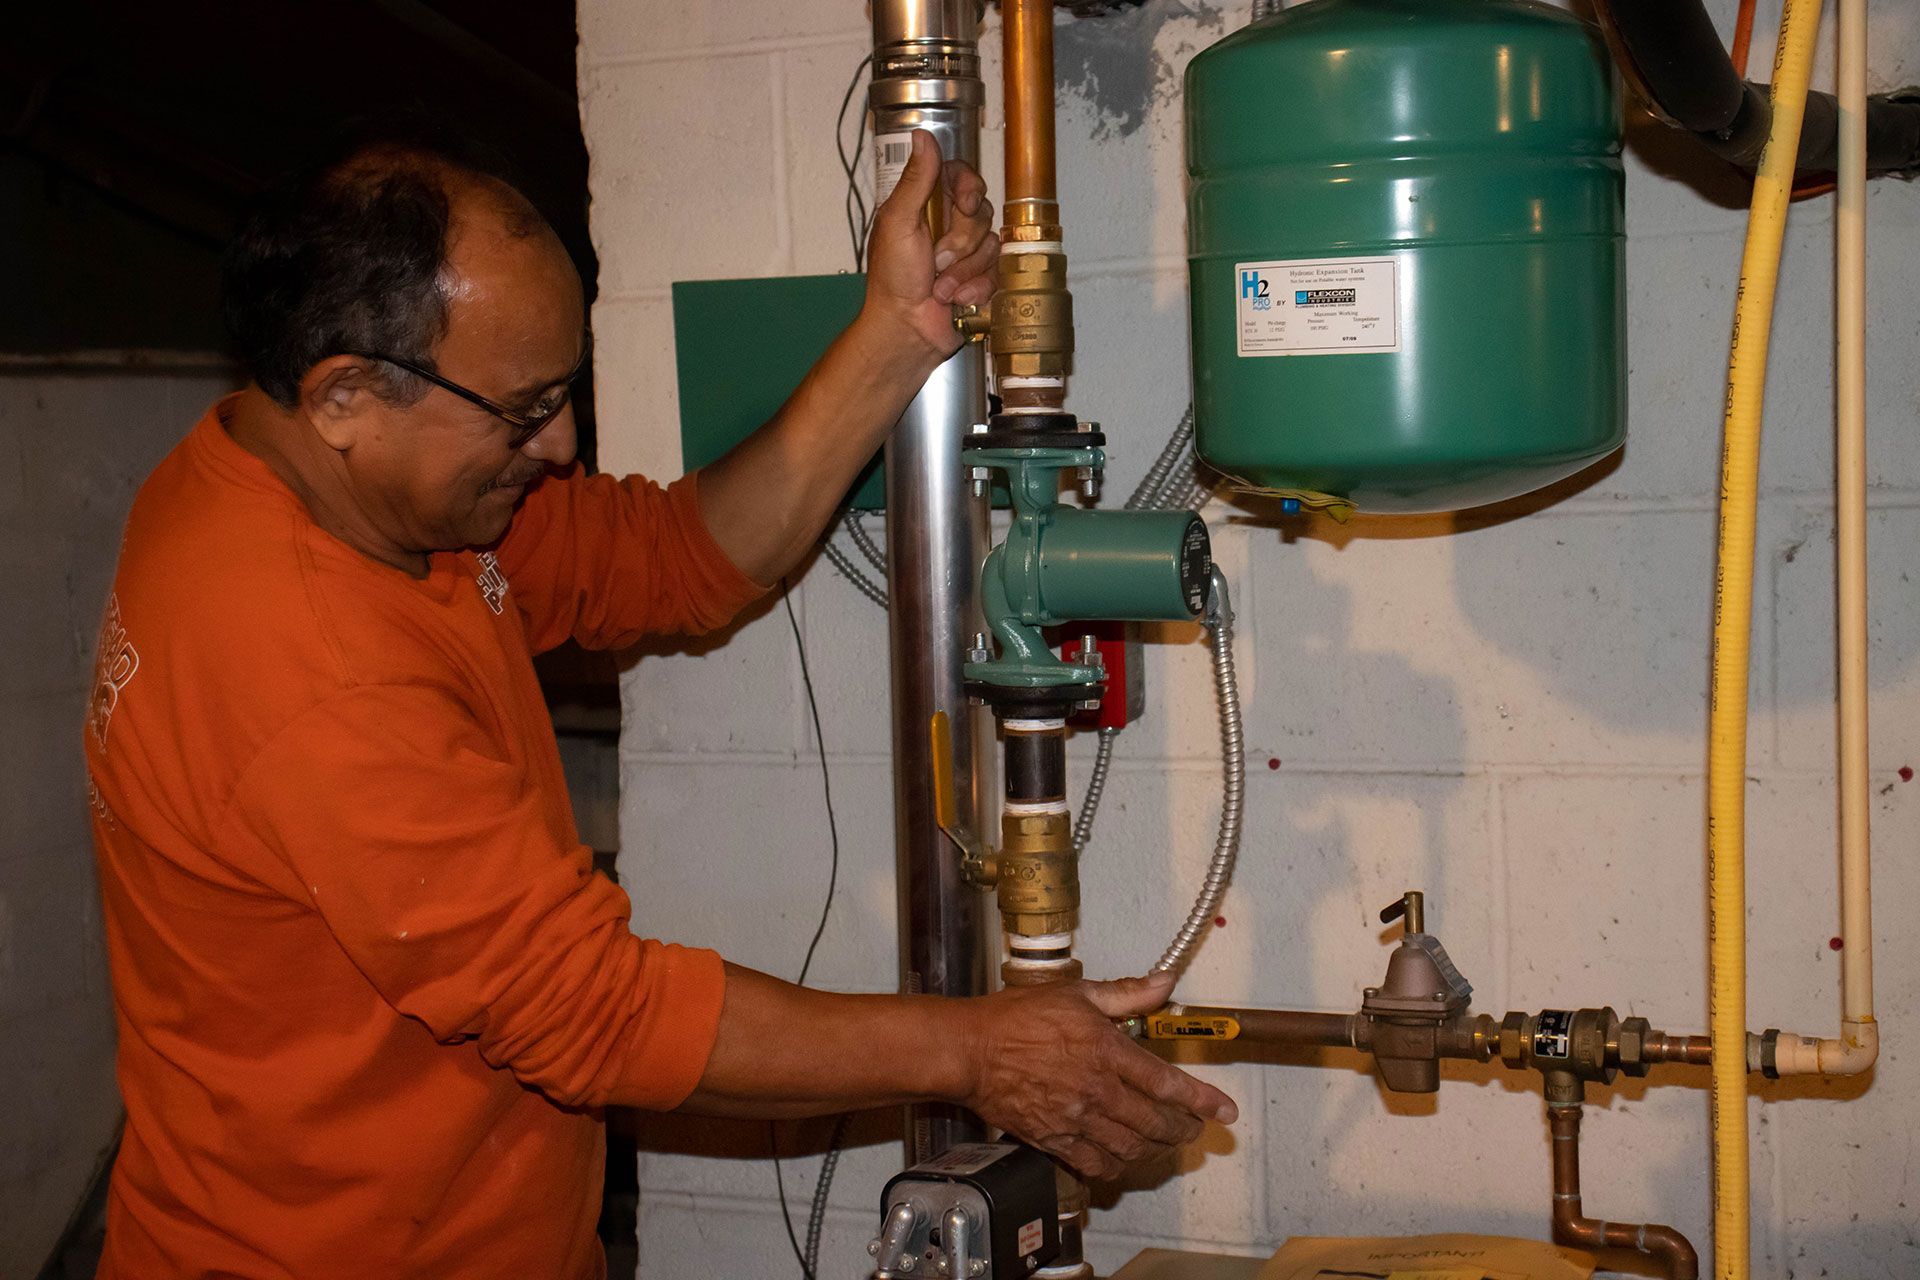 A plumber in an orange shirt is working on a water heater